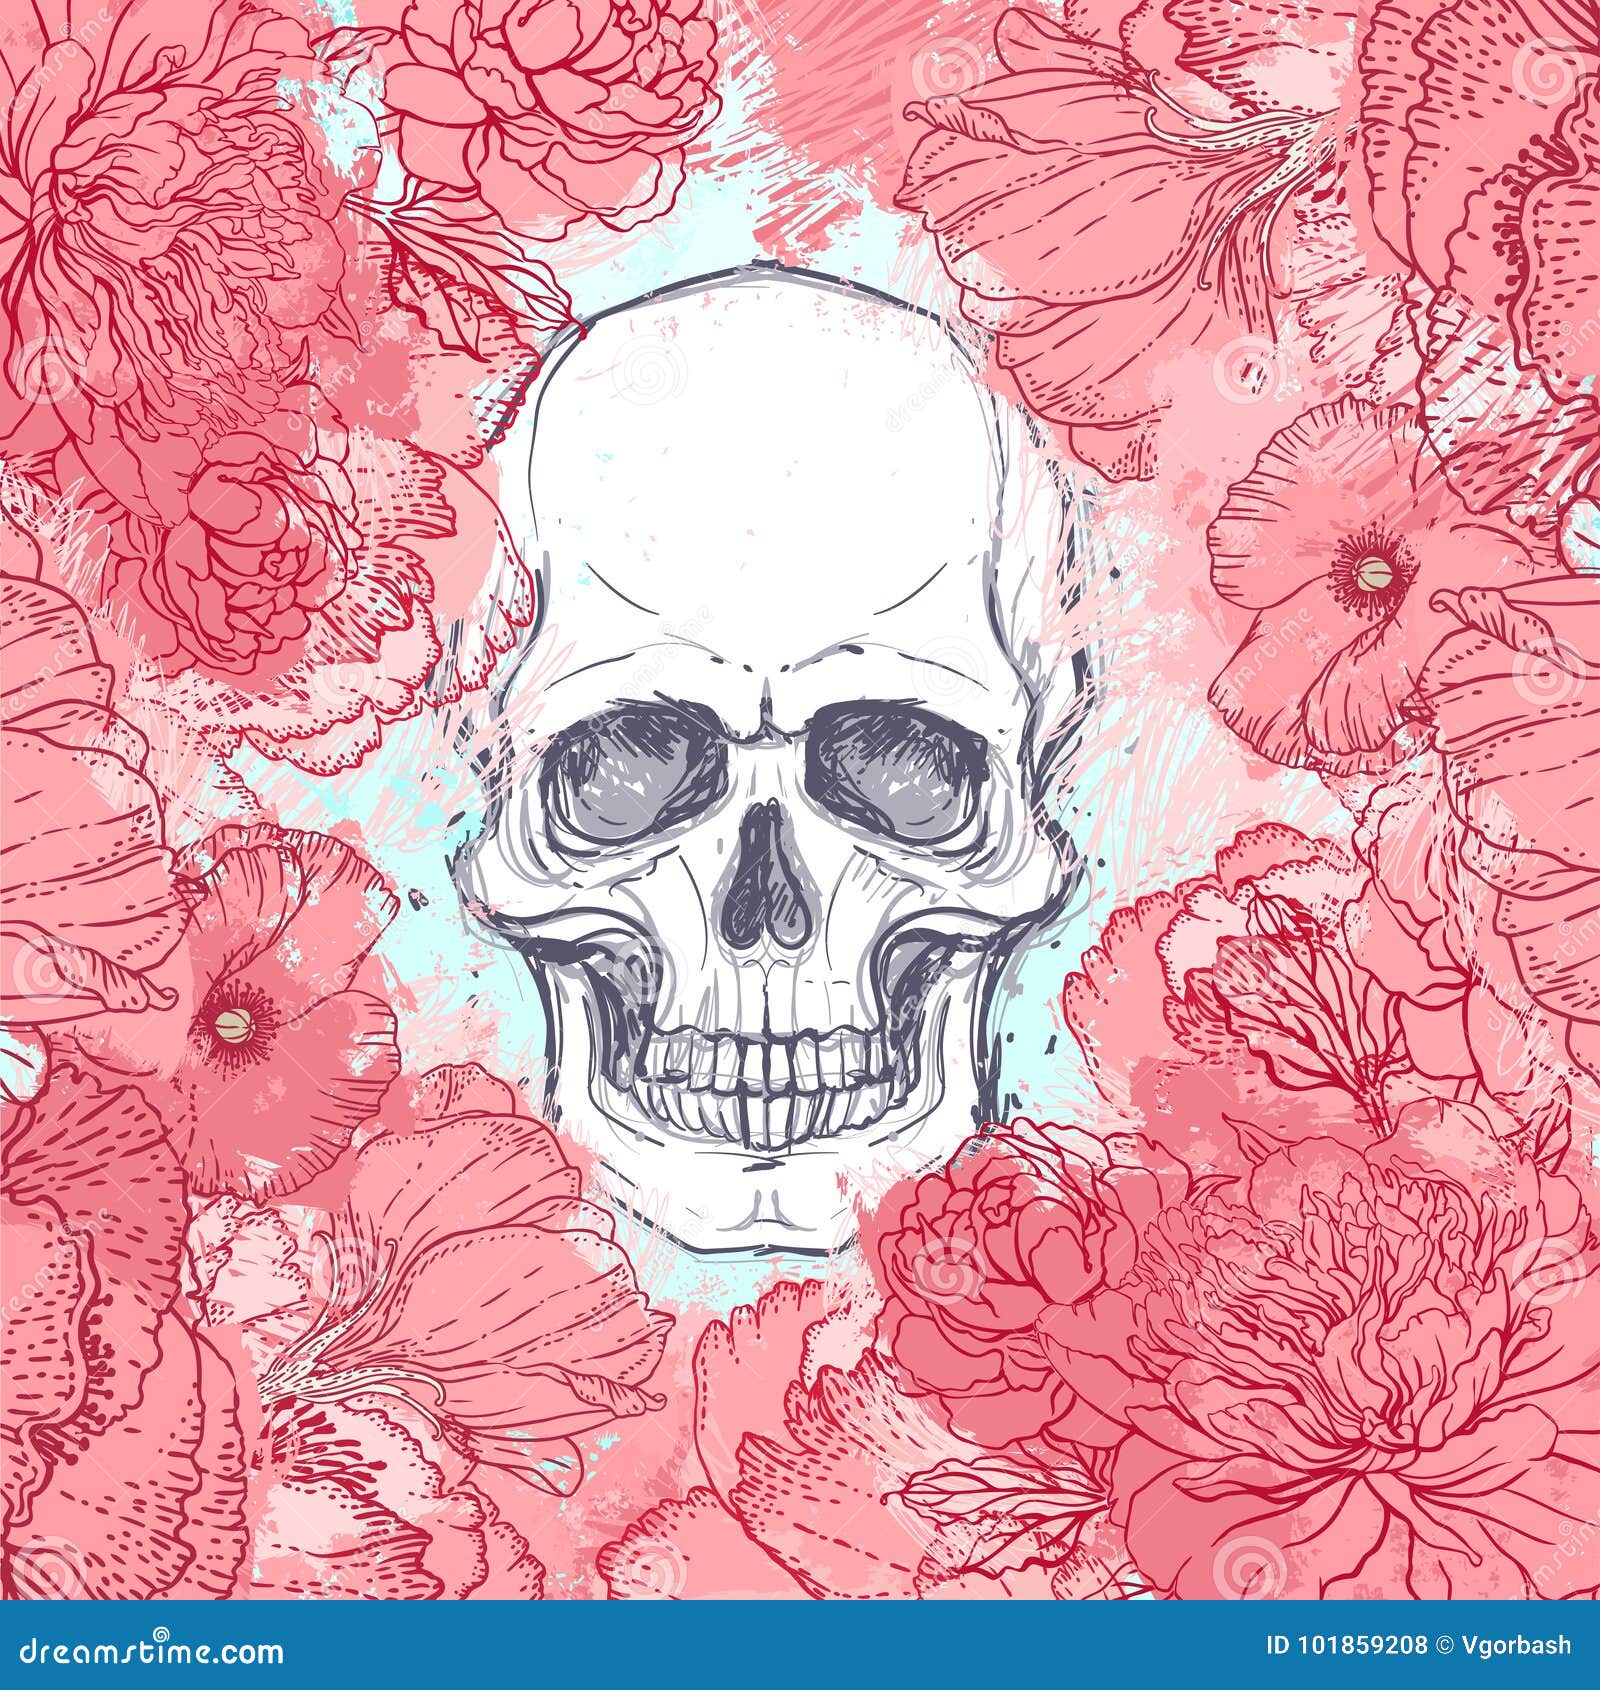 Human Skull With Peony Rose And Poppy Flowers On Watercolor